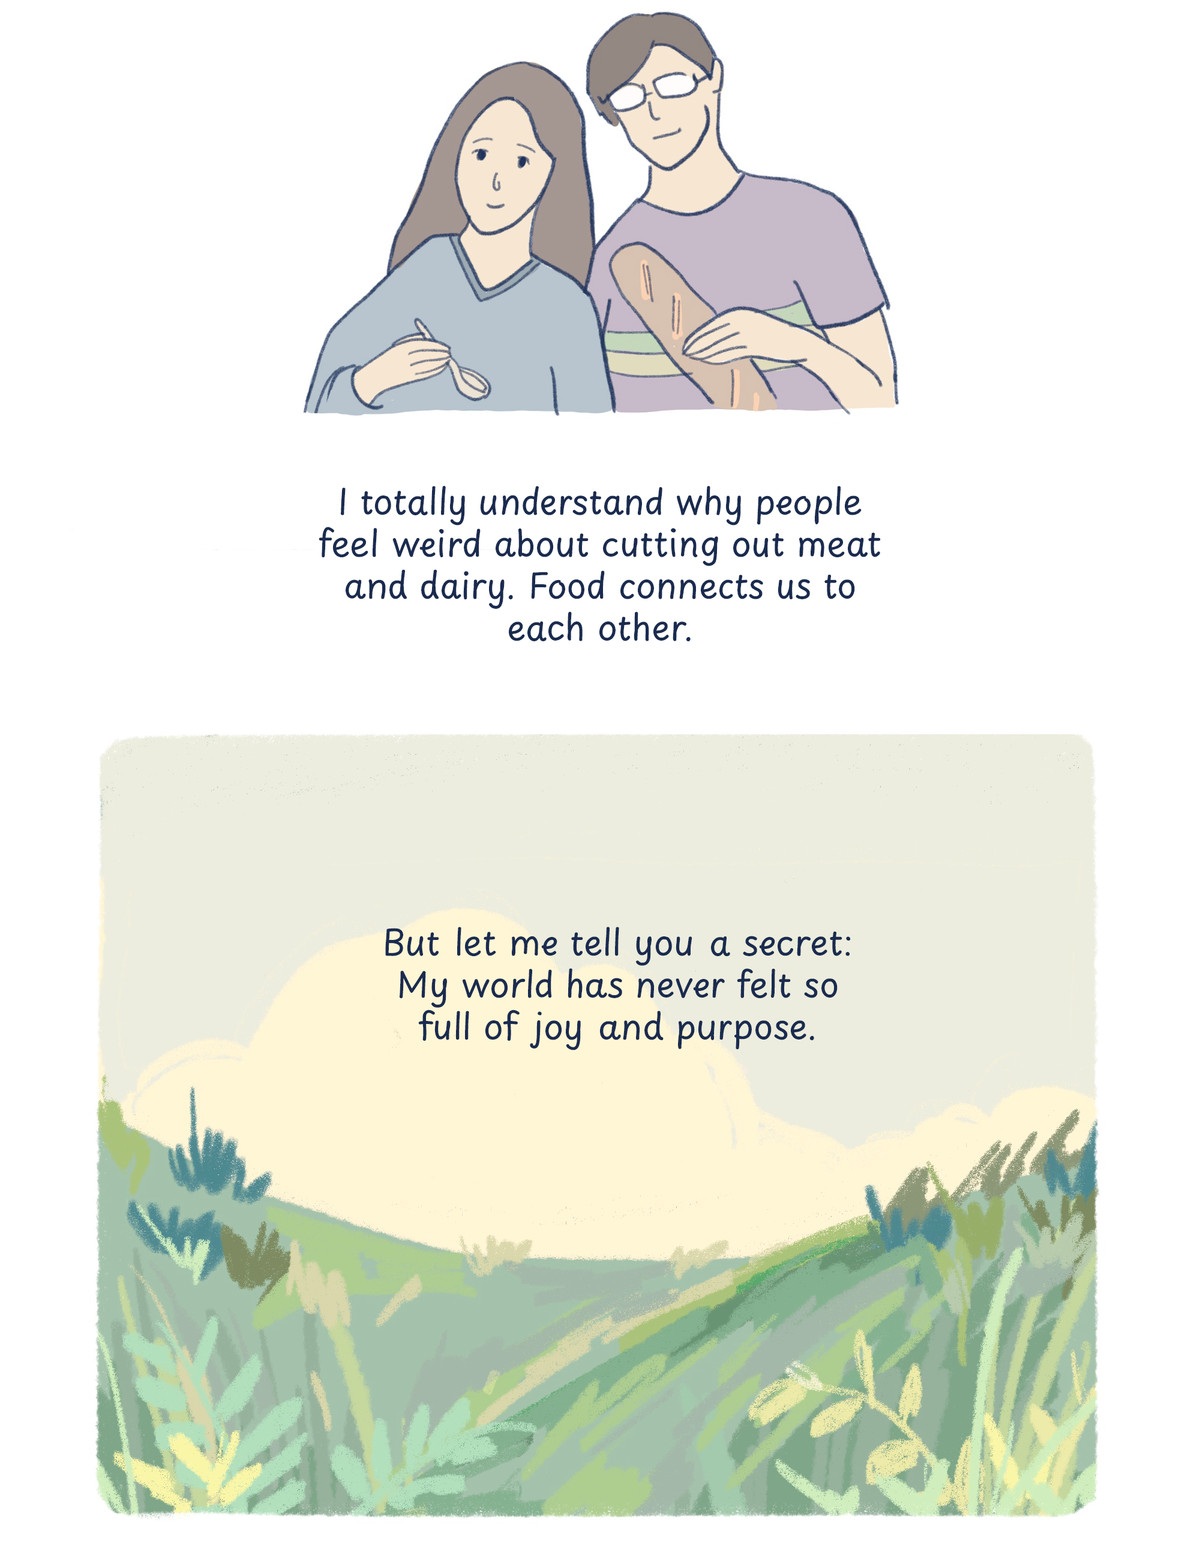 An illustration of the author and friend on a white background, followed by text that says: “I totally understand why people feel weird about cutting out meat and dairy. Food connects us to each other.” And then, a lush field with text superimposed: “But let me tell you a secret: My world has never felt so full of joy and purpose.”